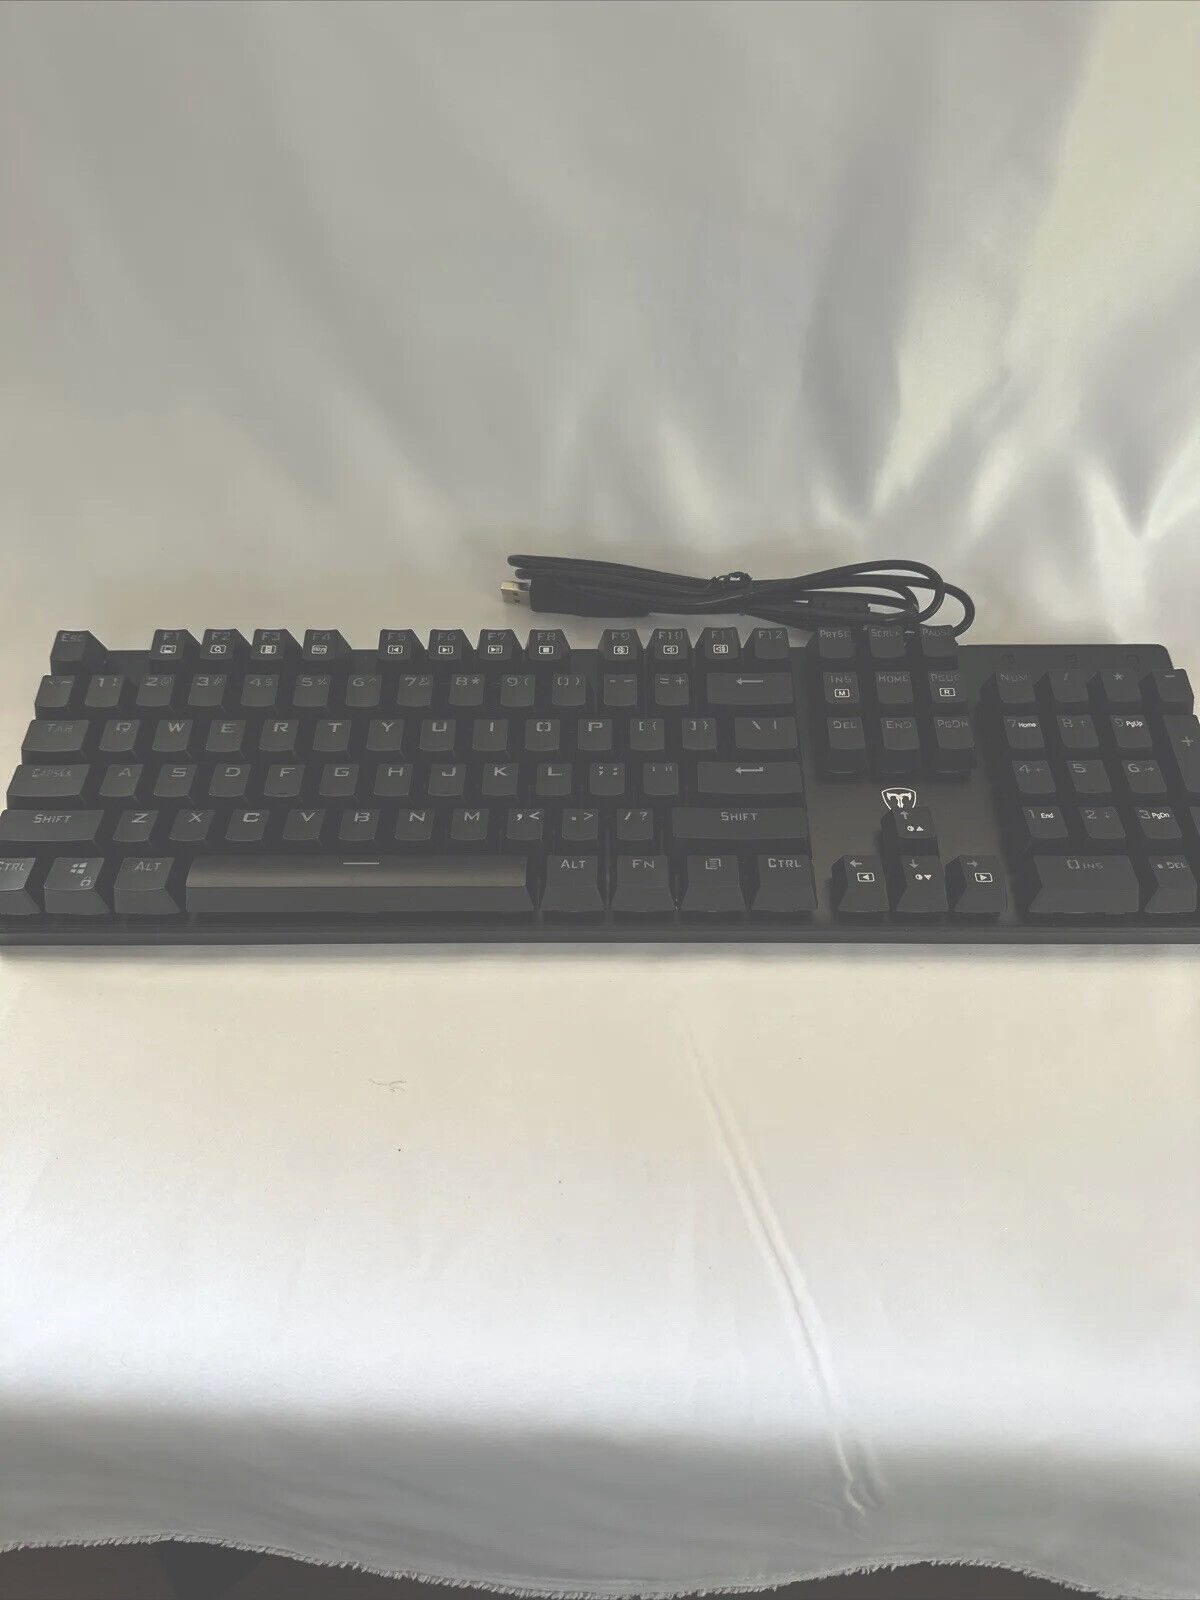 Z) PICTEK PC305A FULL SIZE RGB LIGHT UP WIRED GAMING KEYBOARD